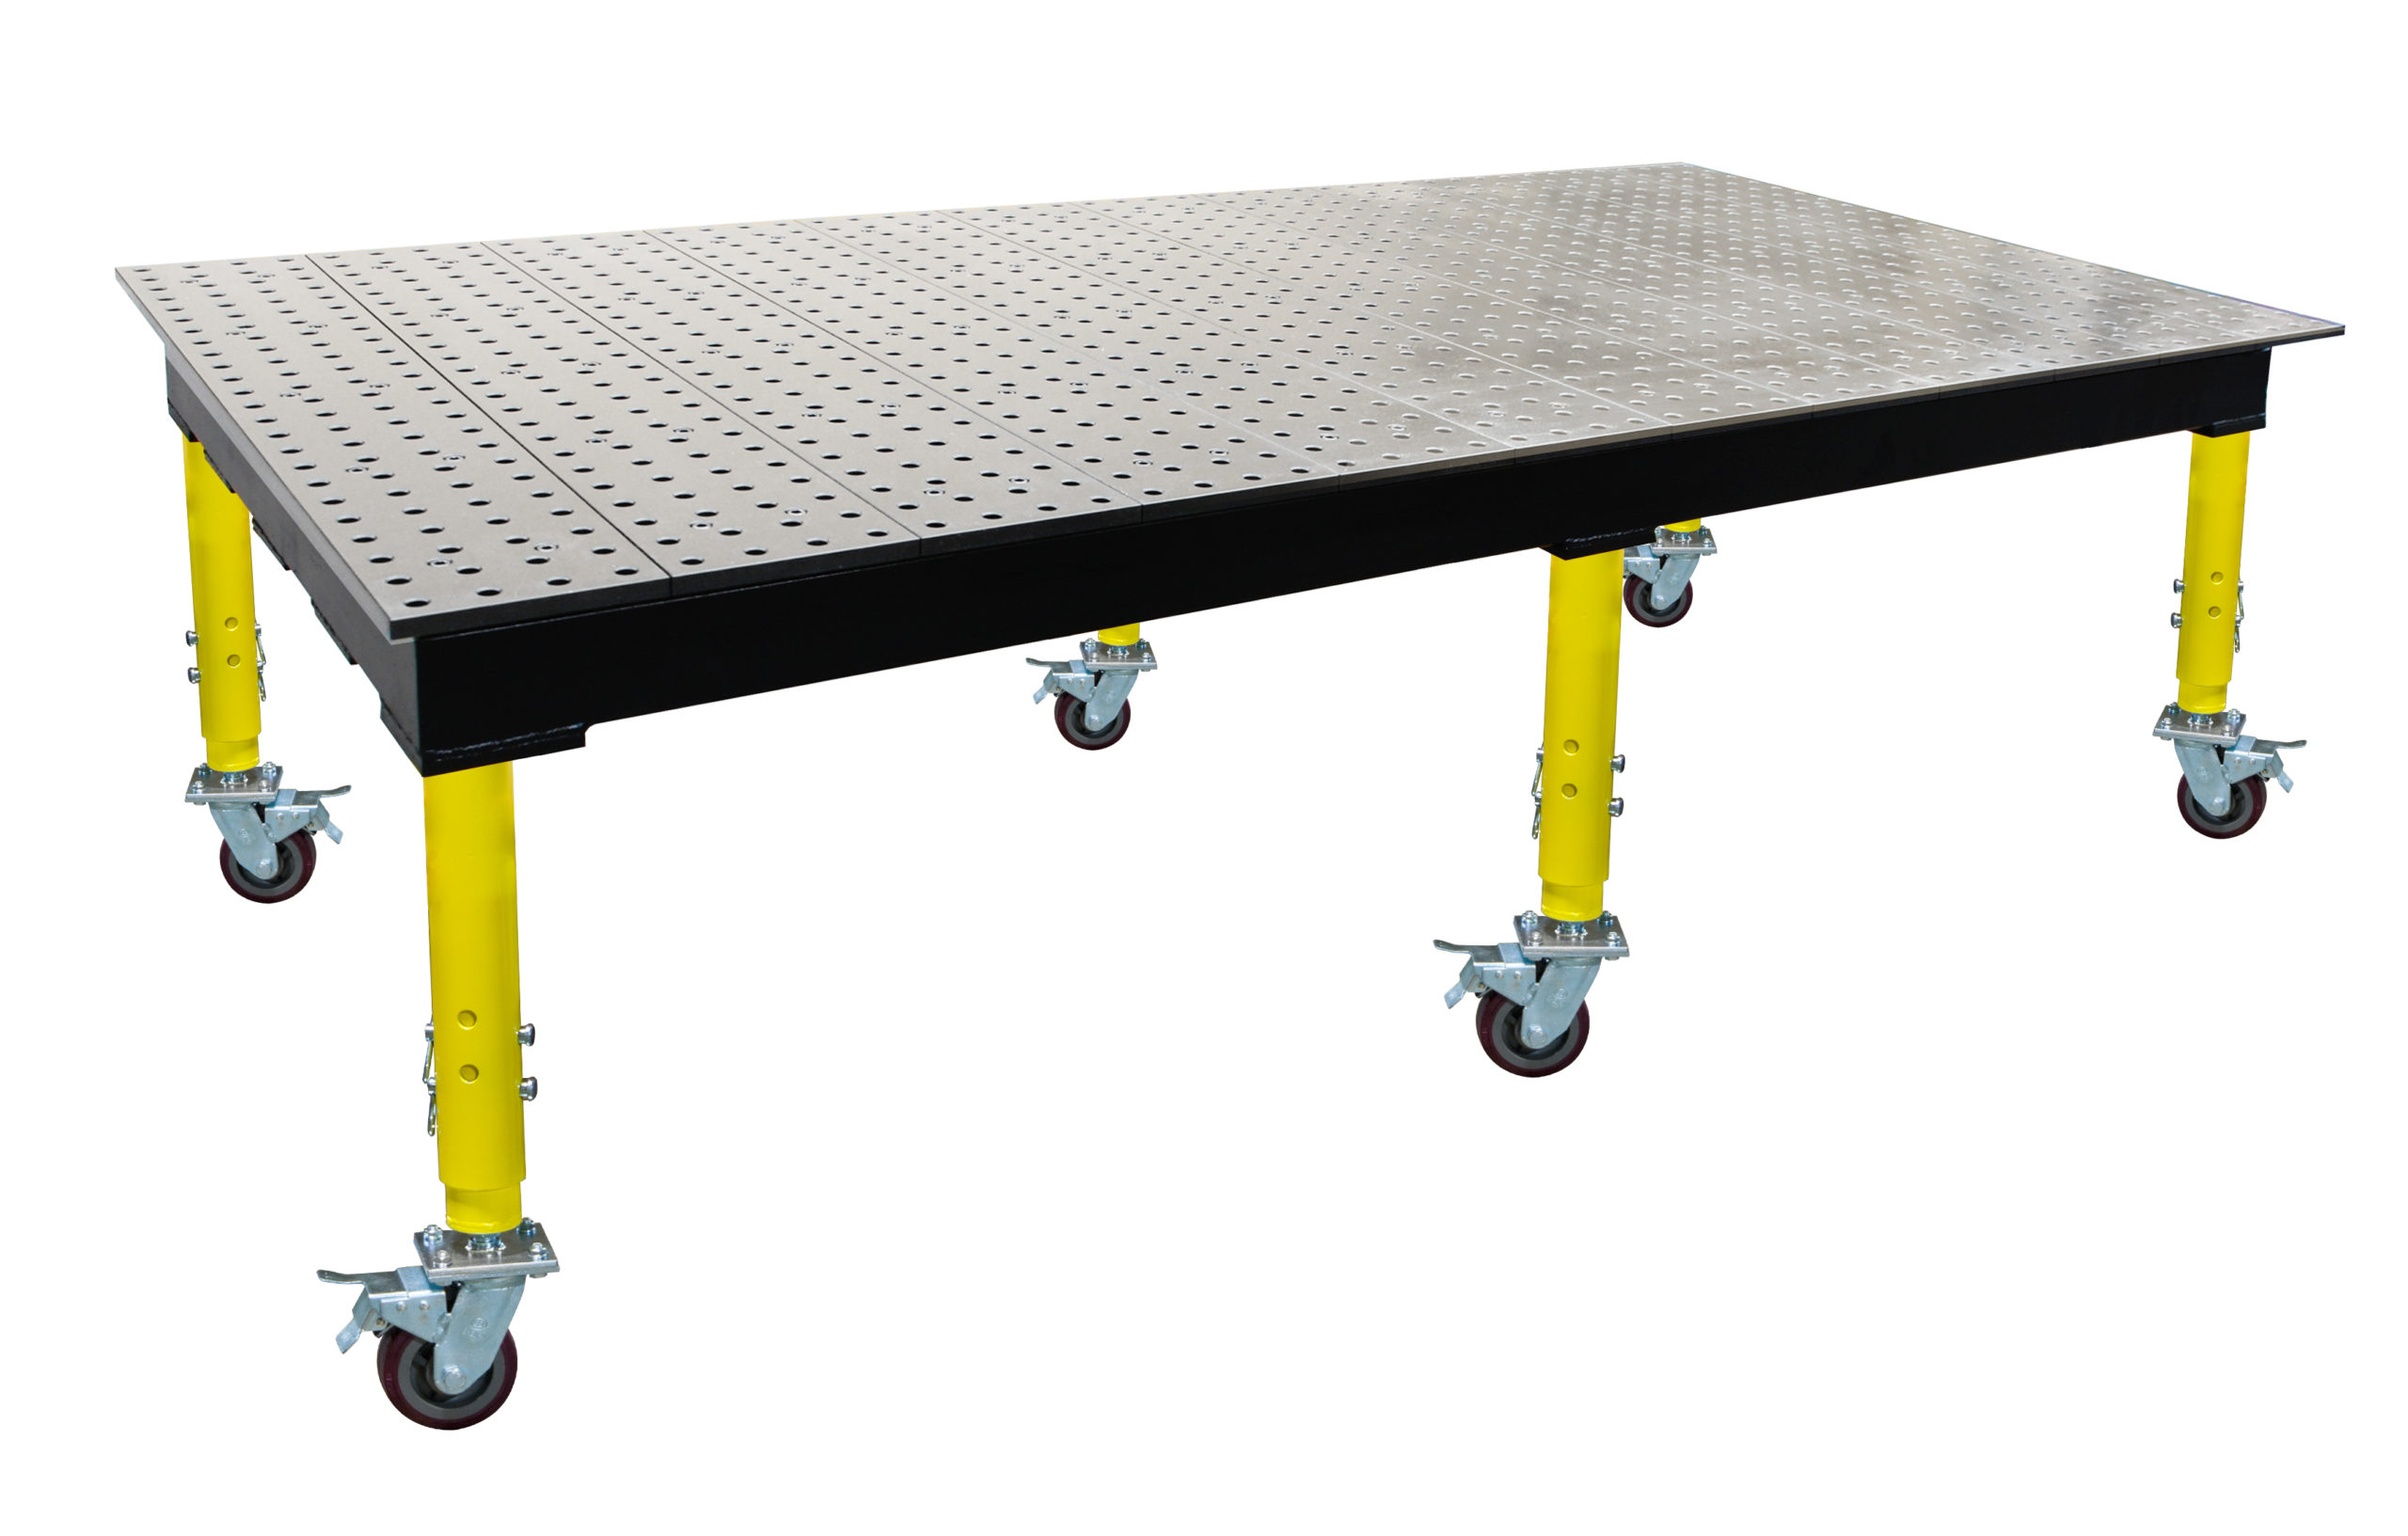 table max pied à roulette 2550-1250 buildpro